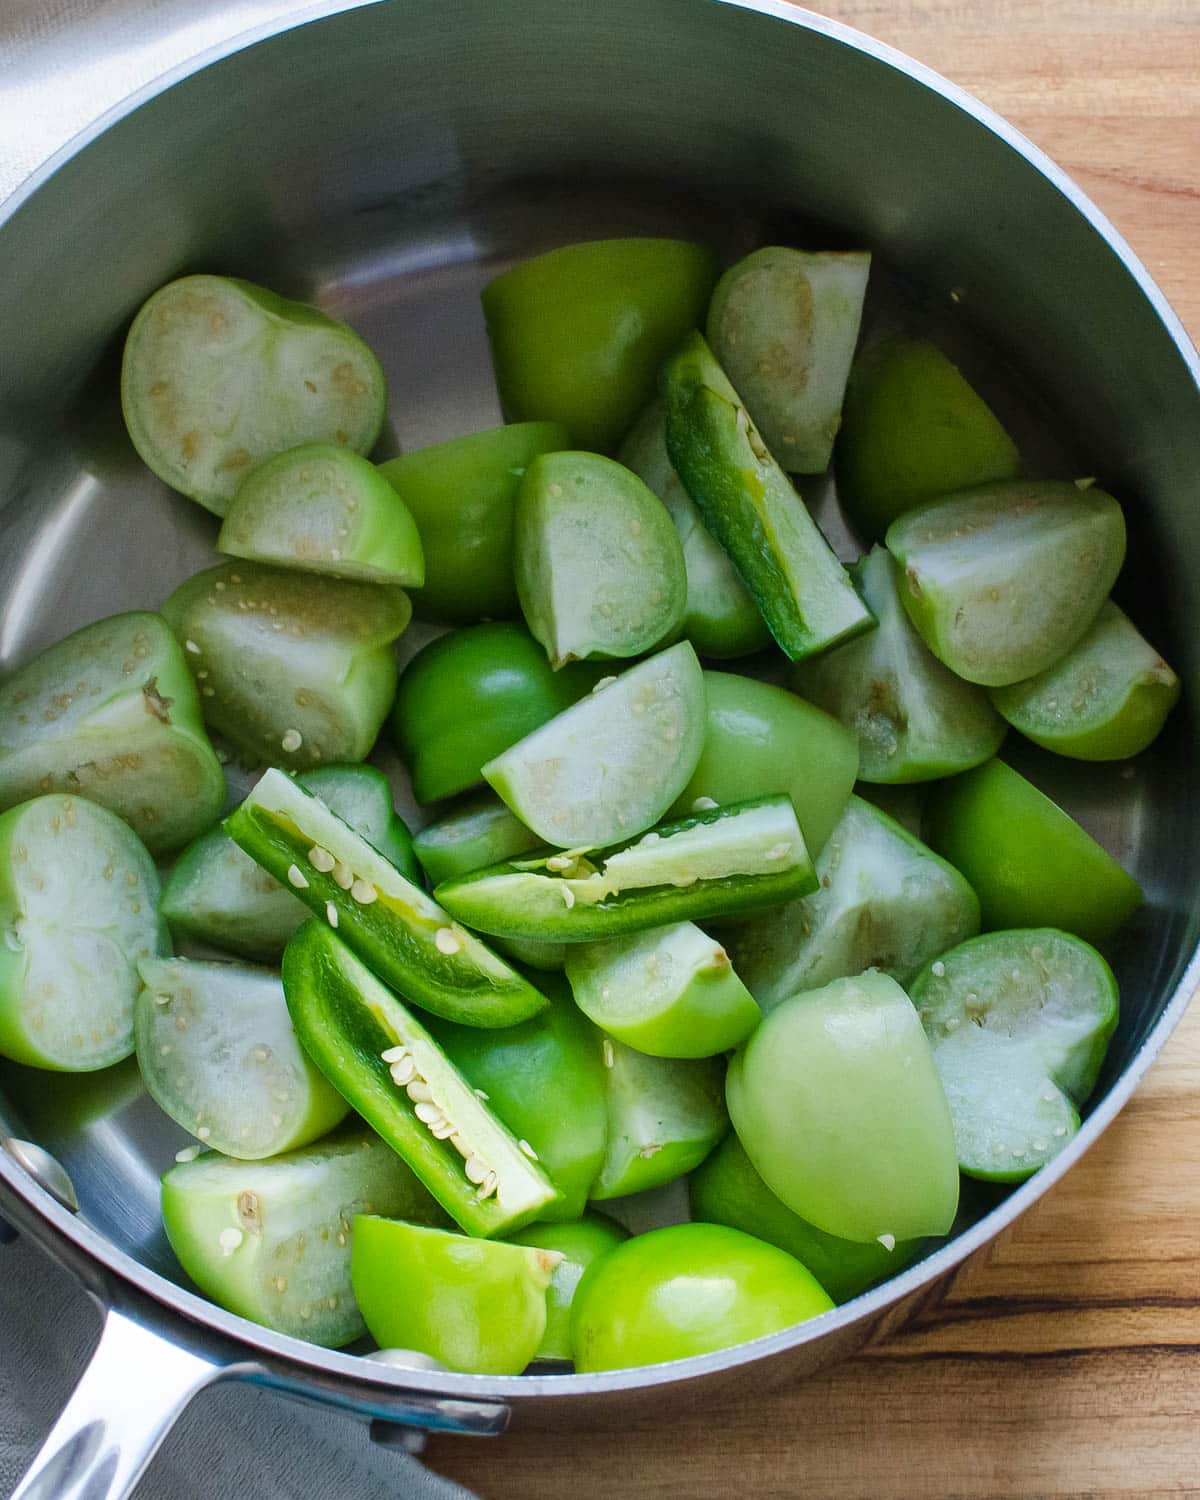 Chopped tomatillos and jalapenos in a saucepan.